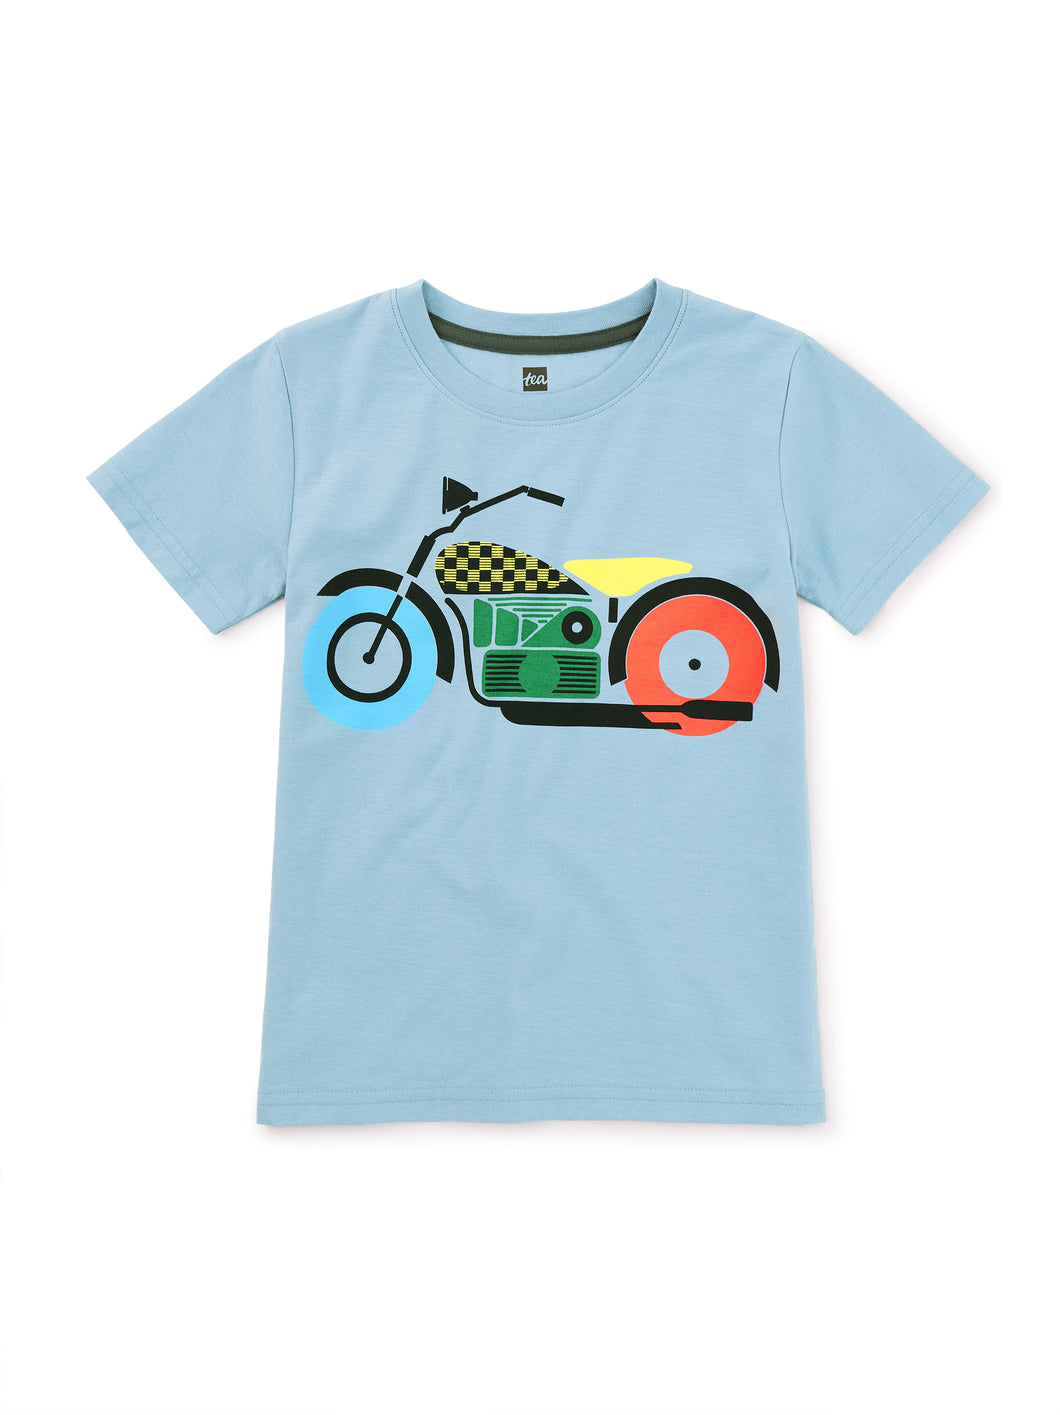 Tea Collection Motorcycle Graphic Tee - Cloud